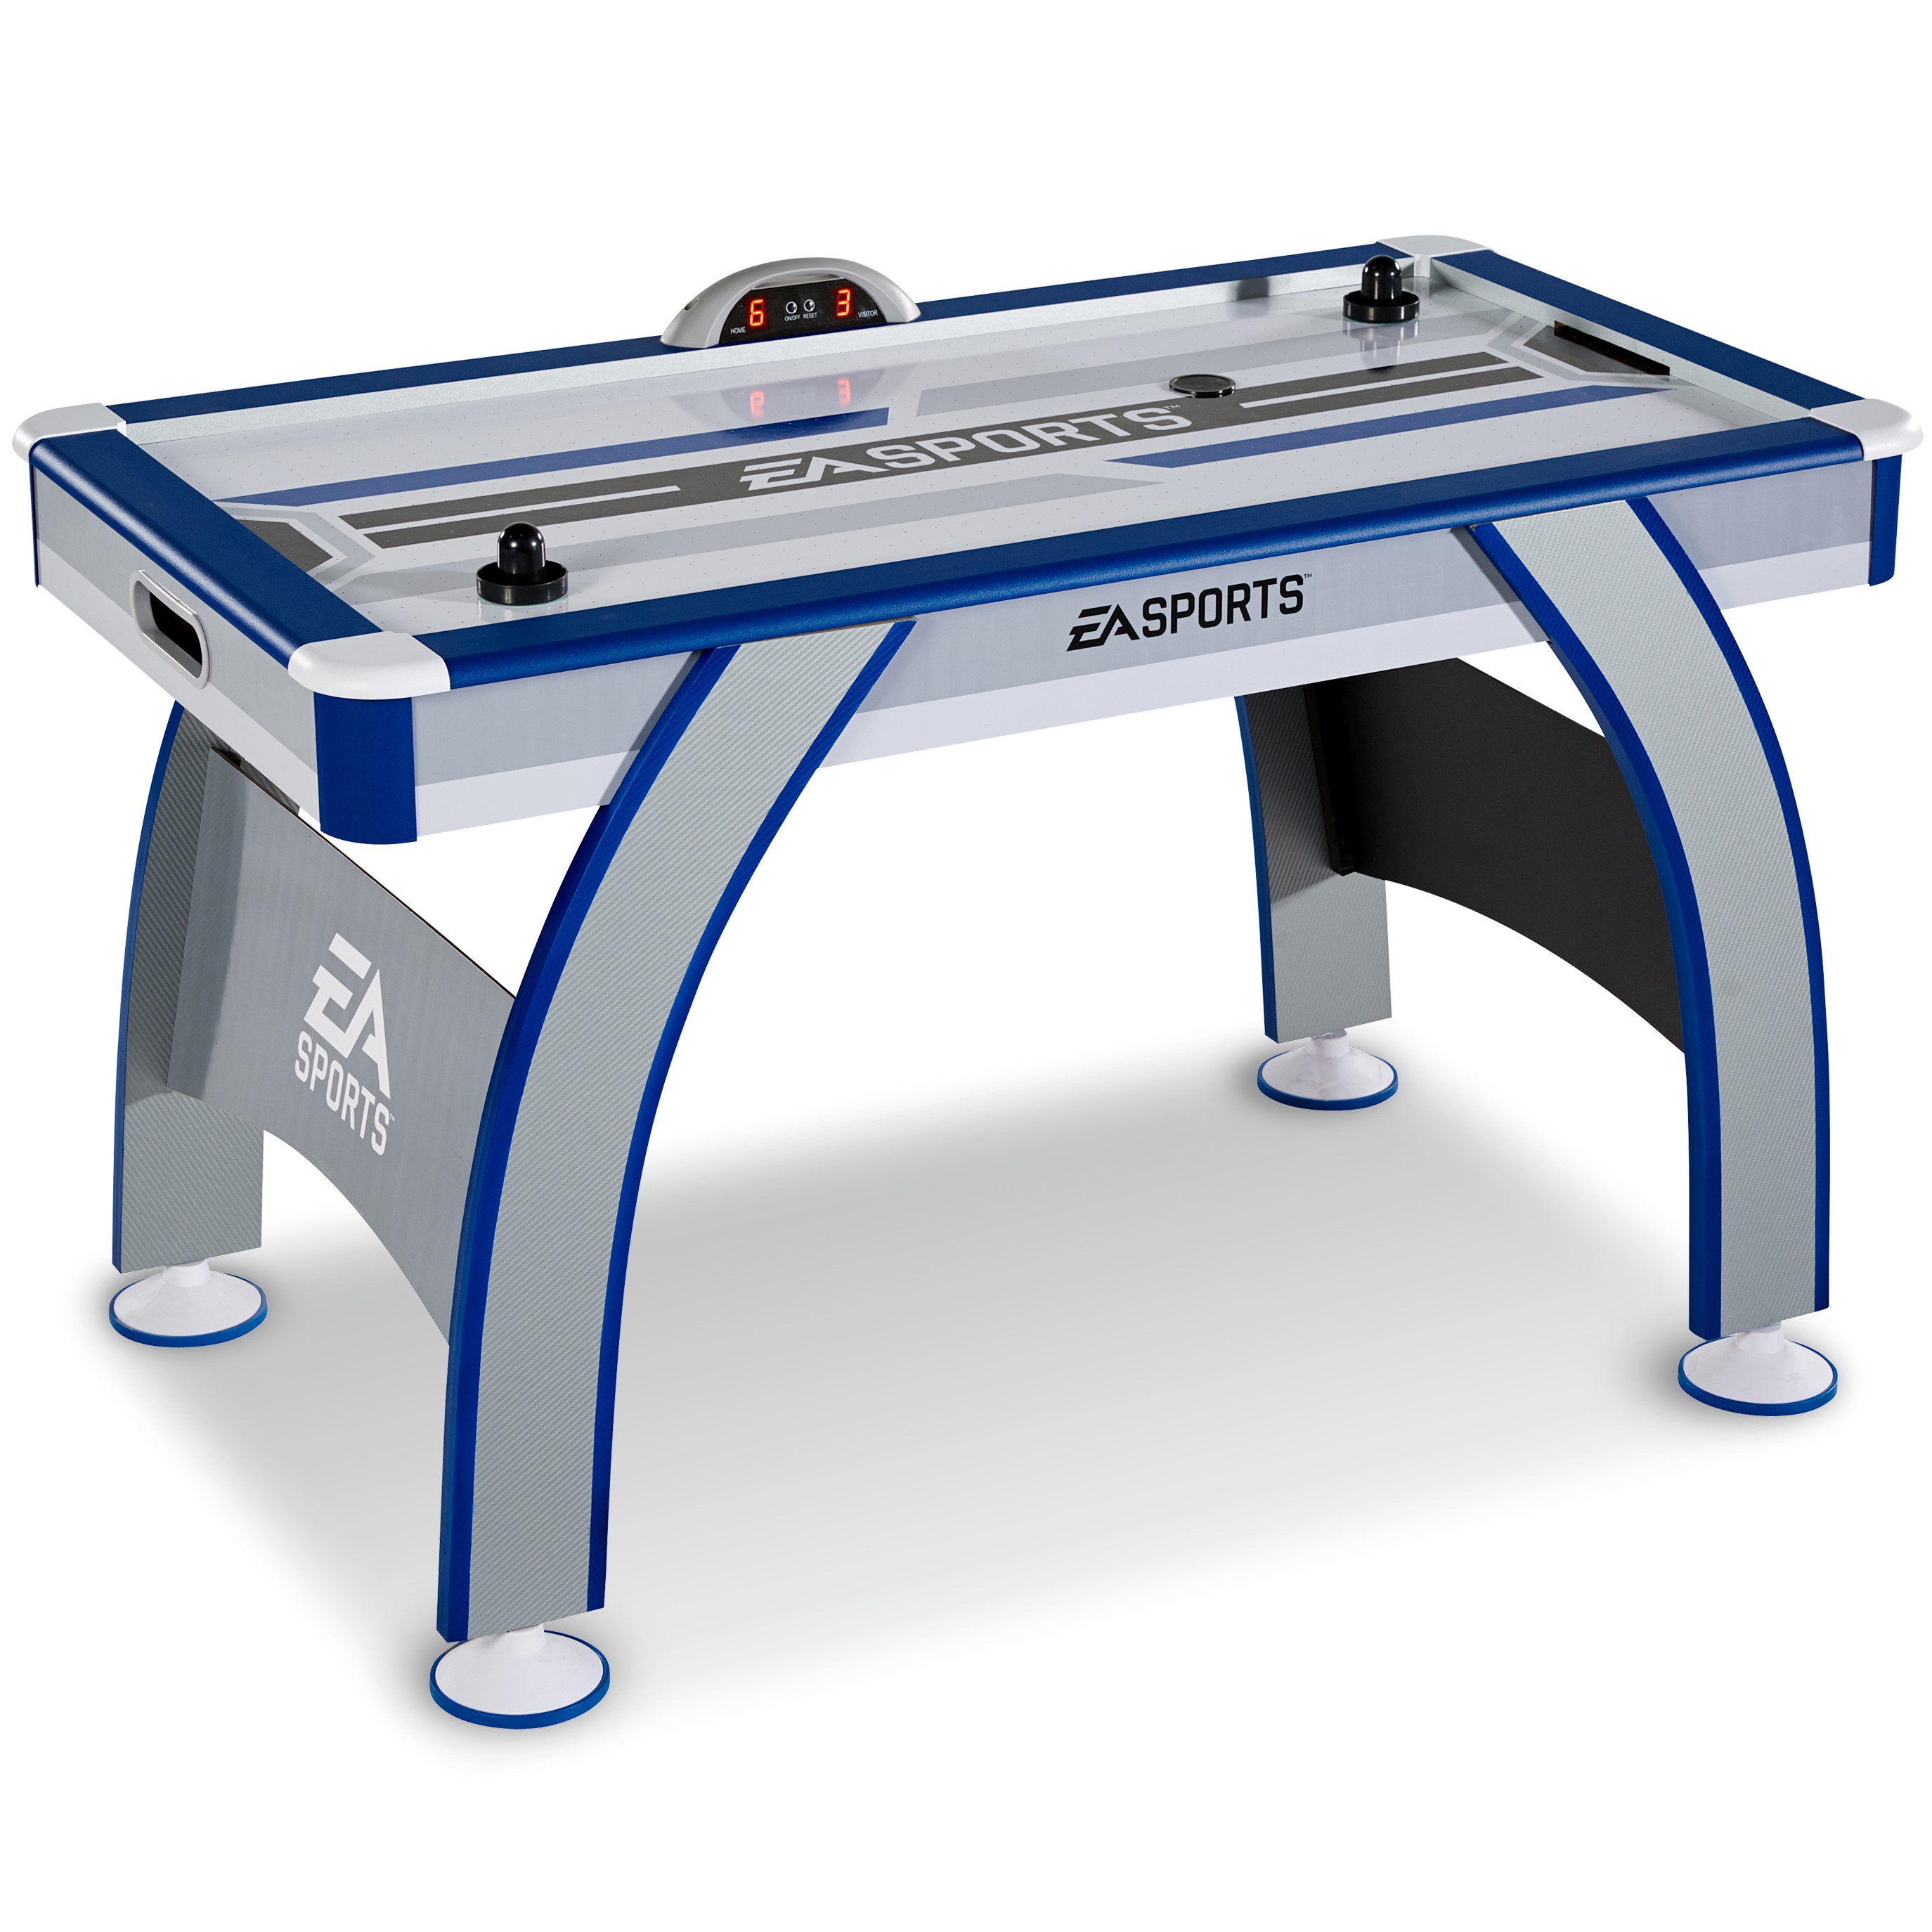 EA Sports 54″ Air Powered Hockey Table with LED Electronic Scorer